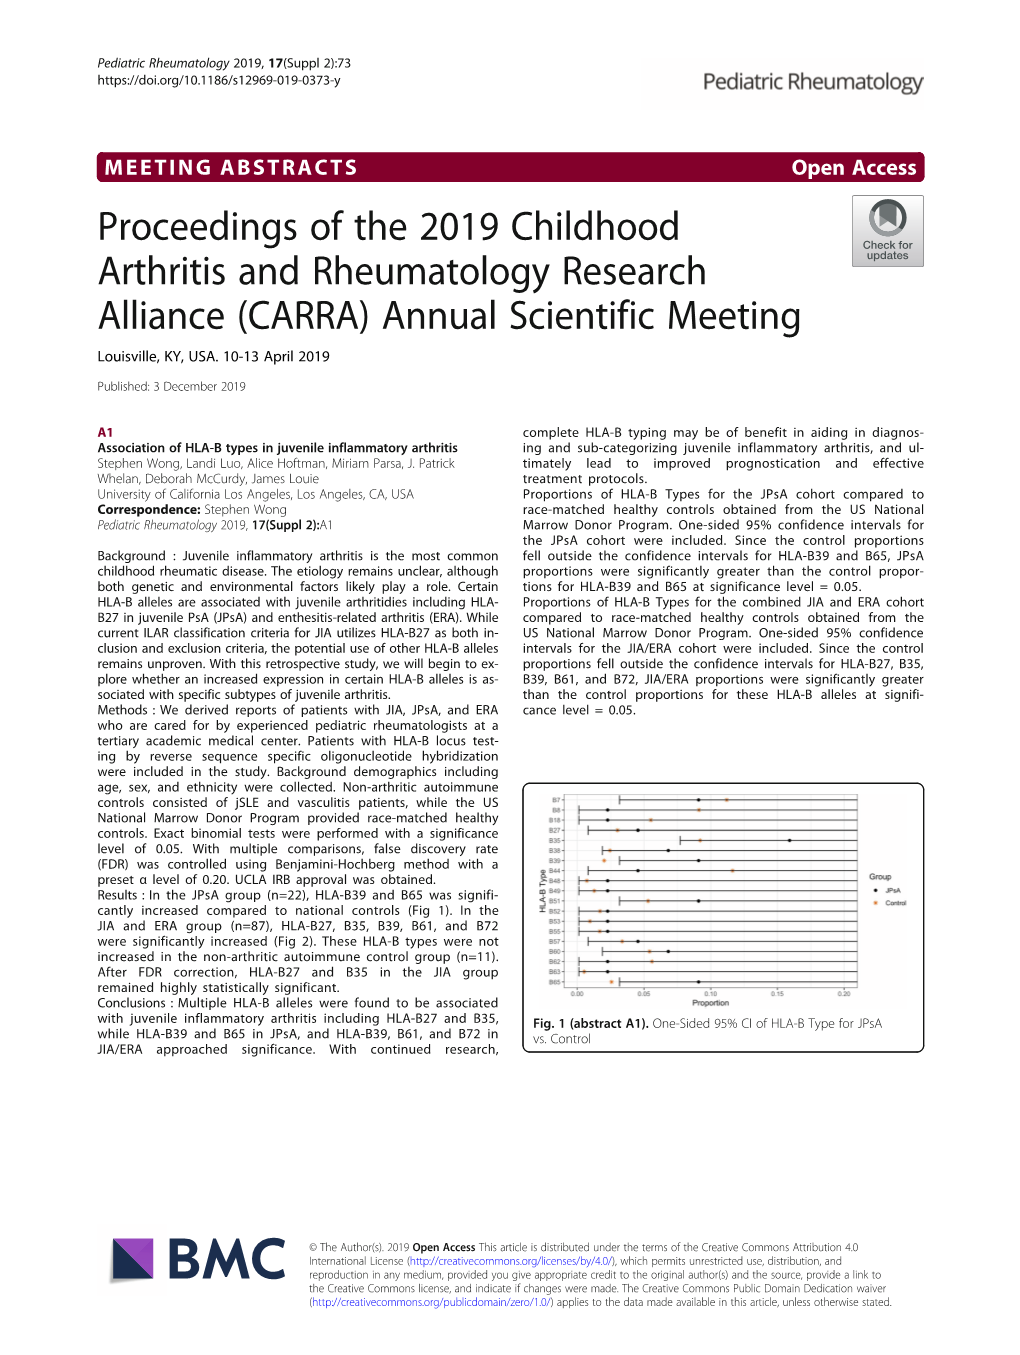 Proceedings of the 2019 Childhood Arthritis and Rheumatology Research Alliance (CARRA) Annual Scientific Meeting Louisville, KY, USA